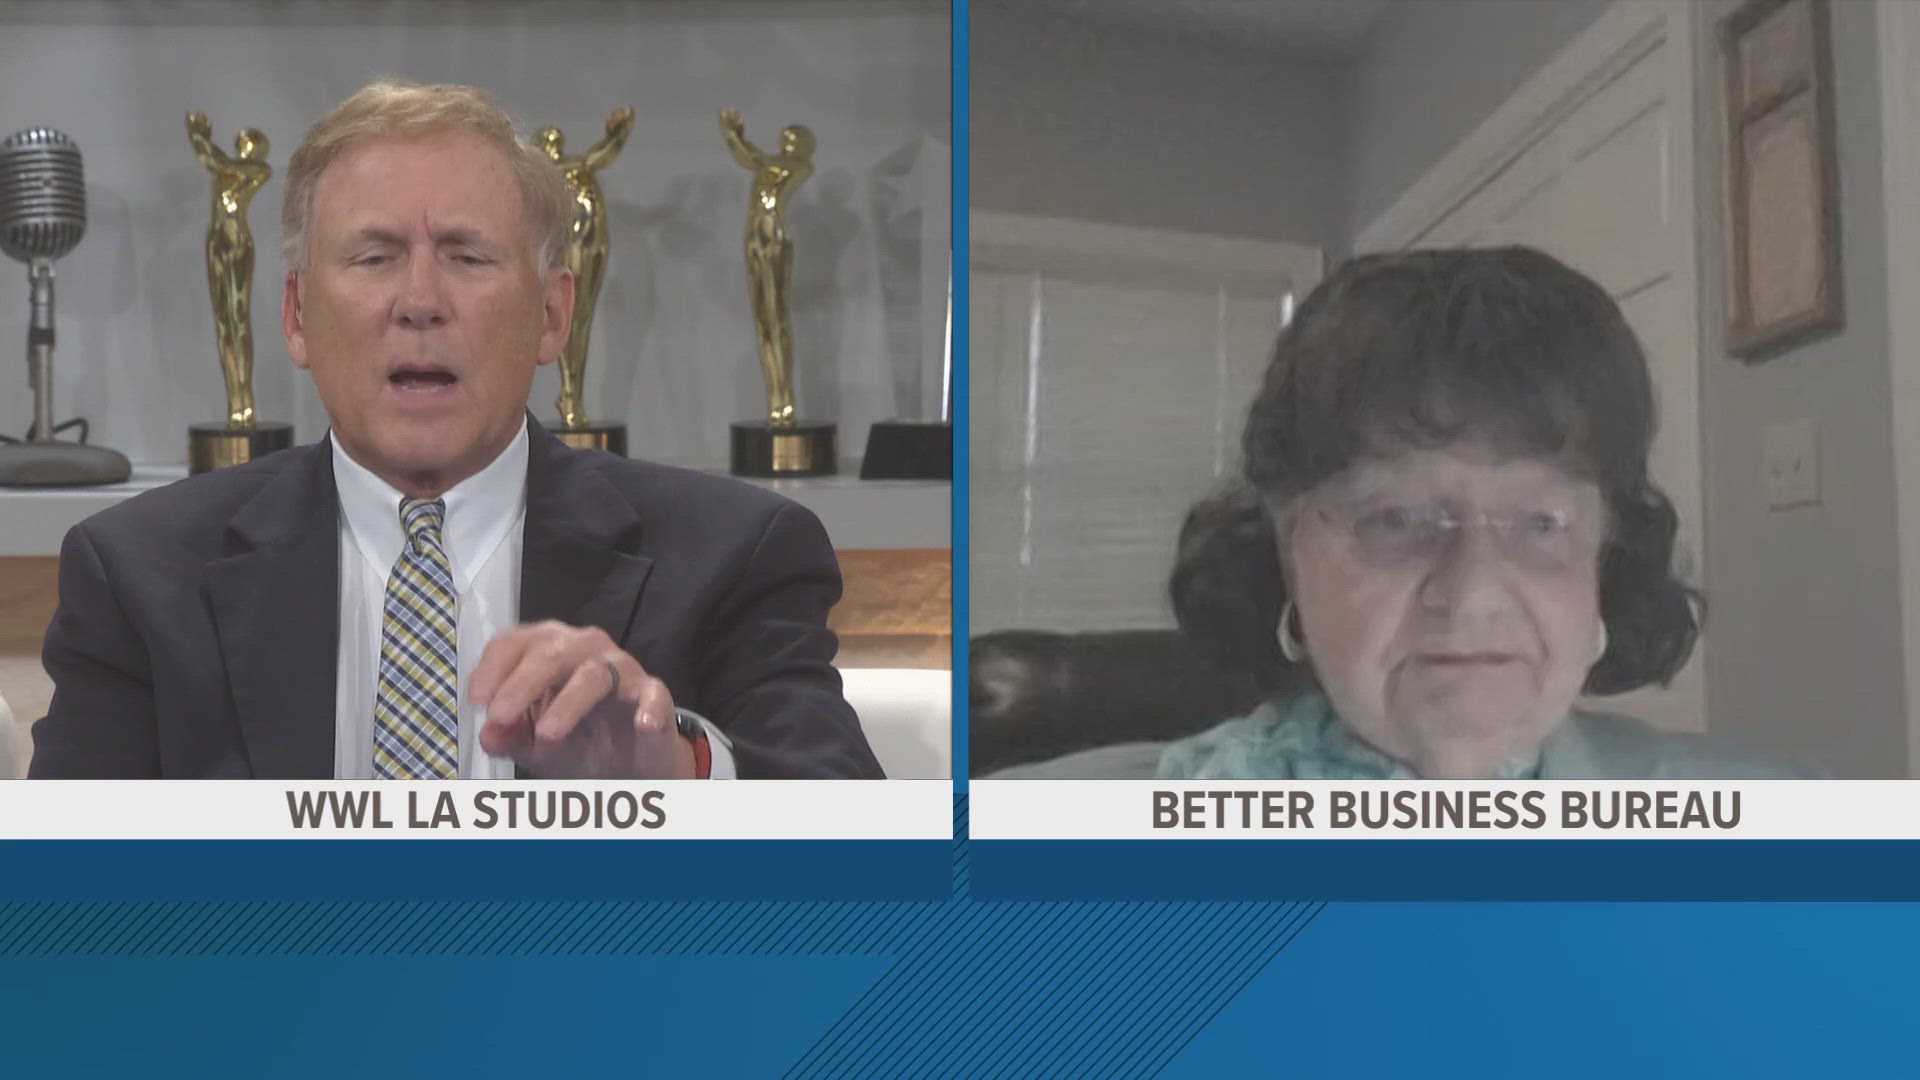 Cynthia Albert, Better Business Bureau, has tips for homeowners with storm damage how they can avoid contractor scams.